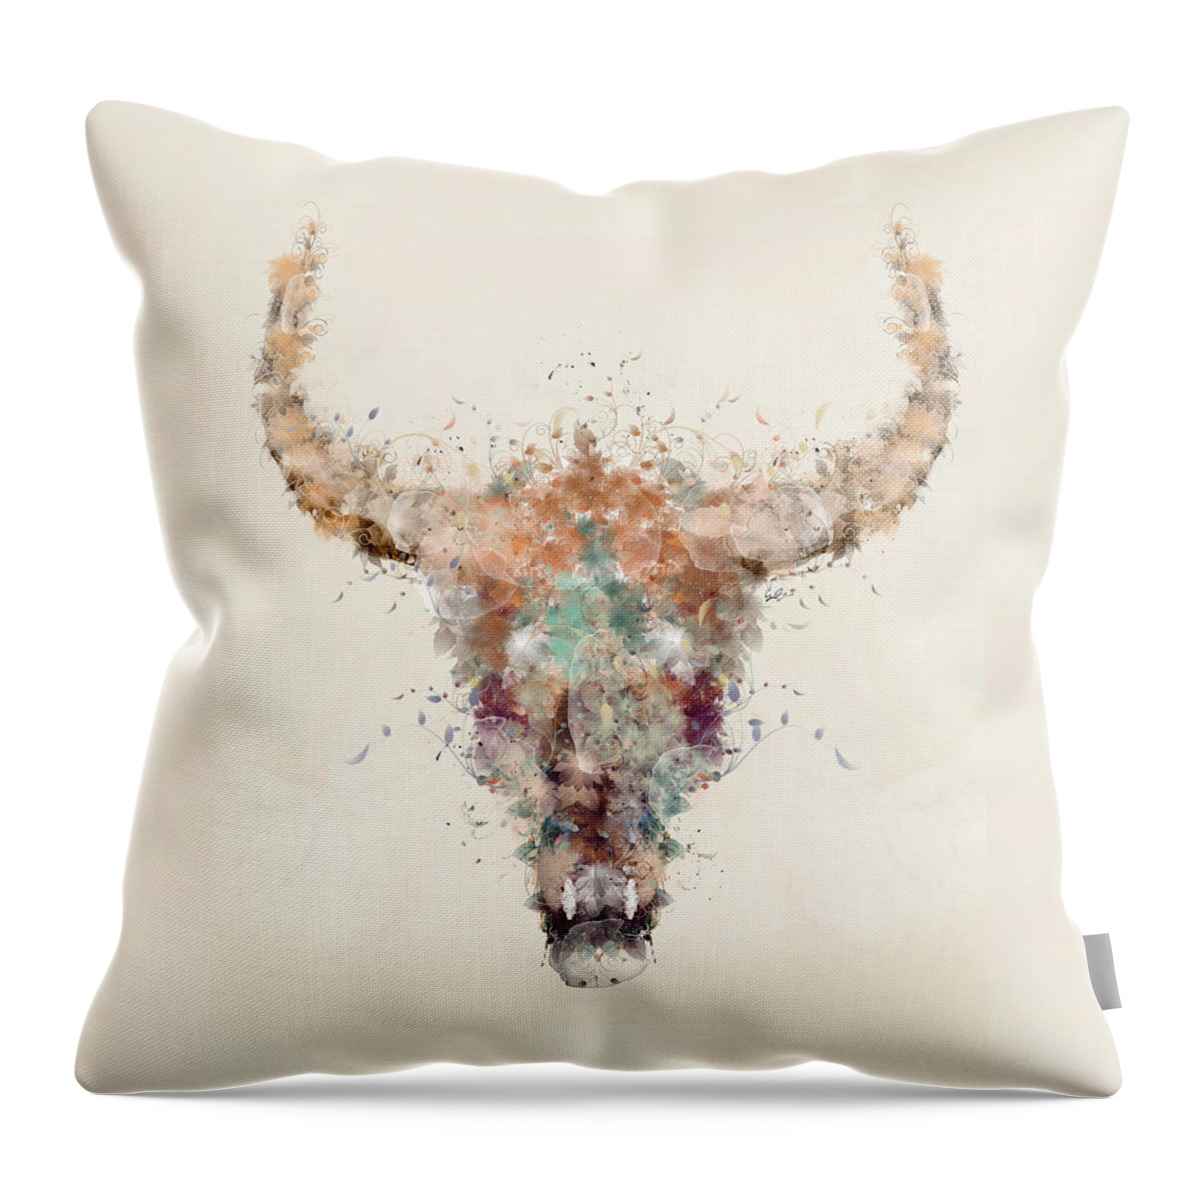 Cow Skull Throw Pillow featuring the painting Cow Skull by Bri Buckley